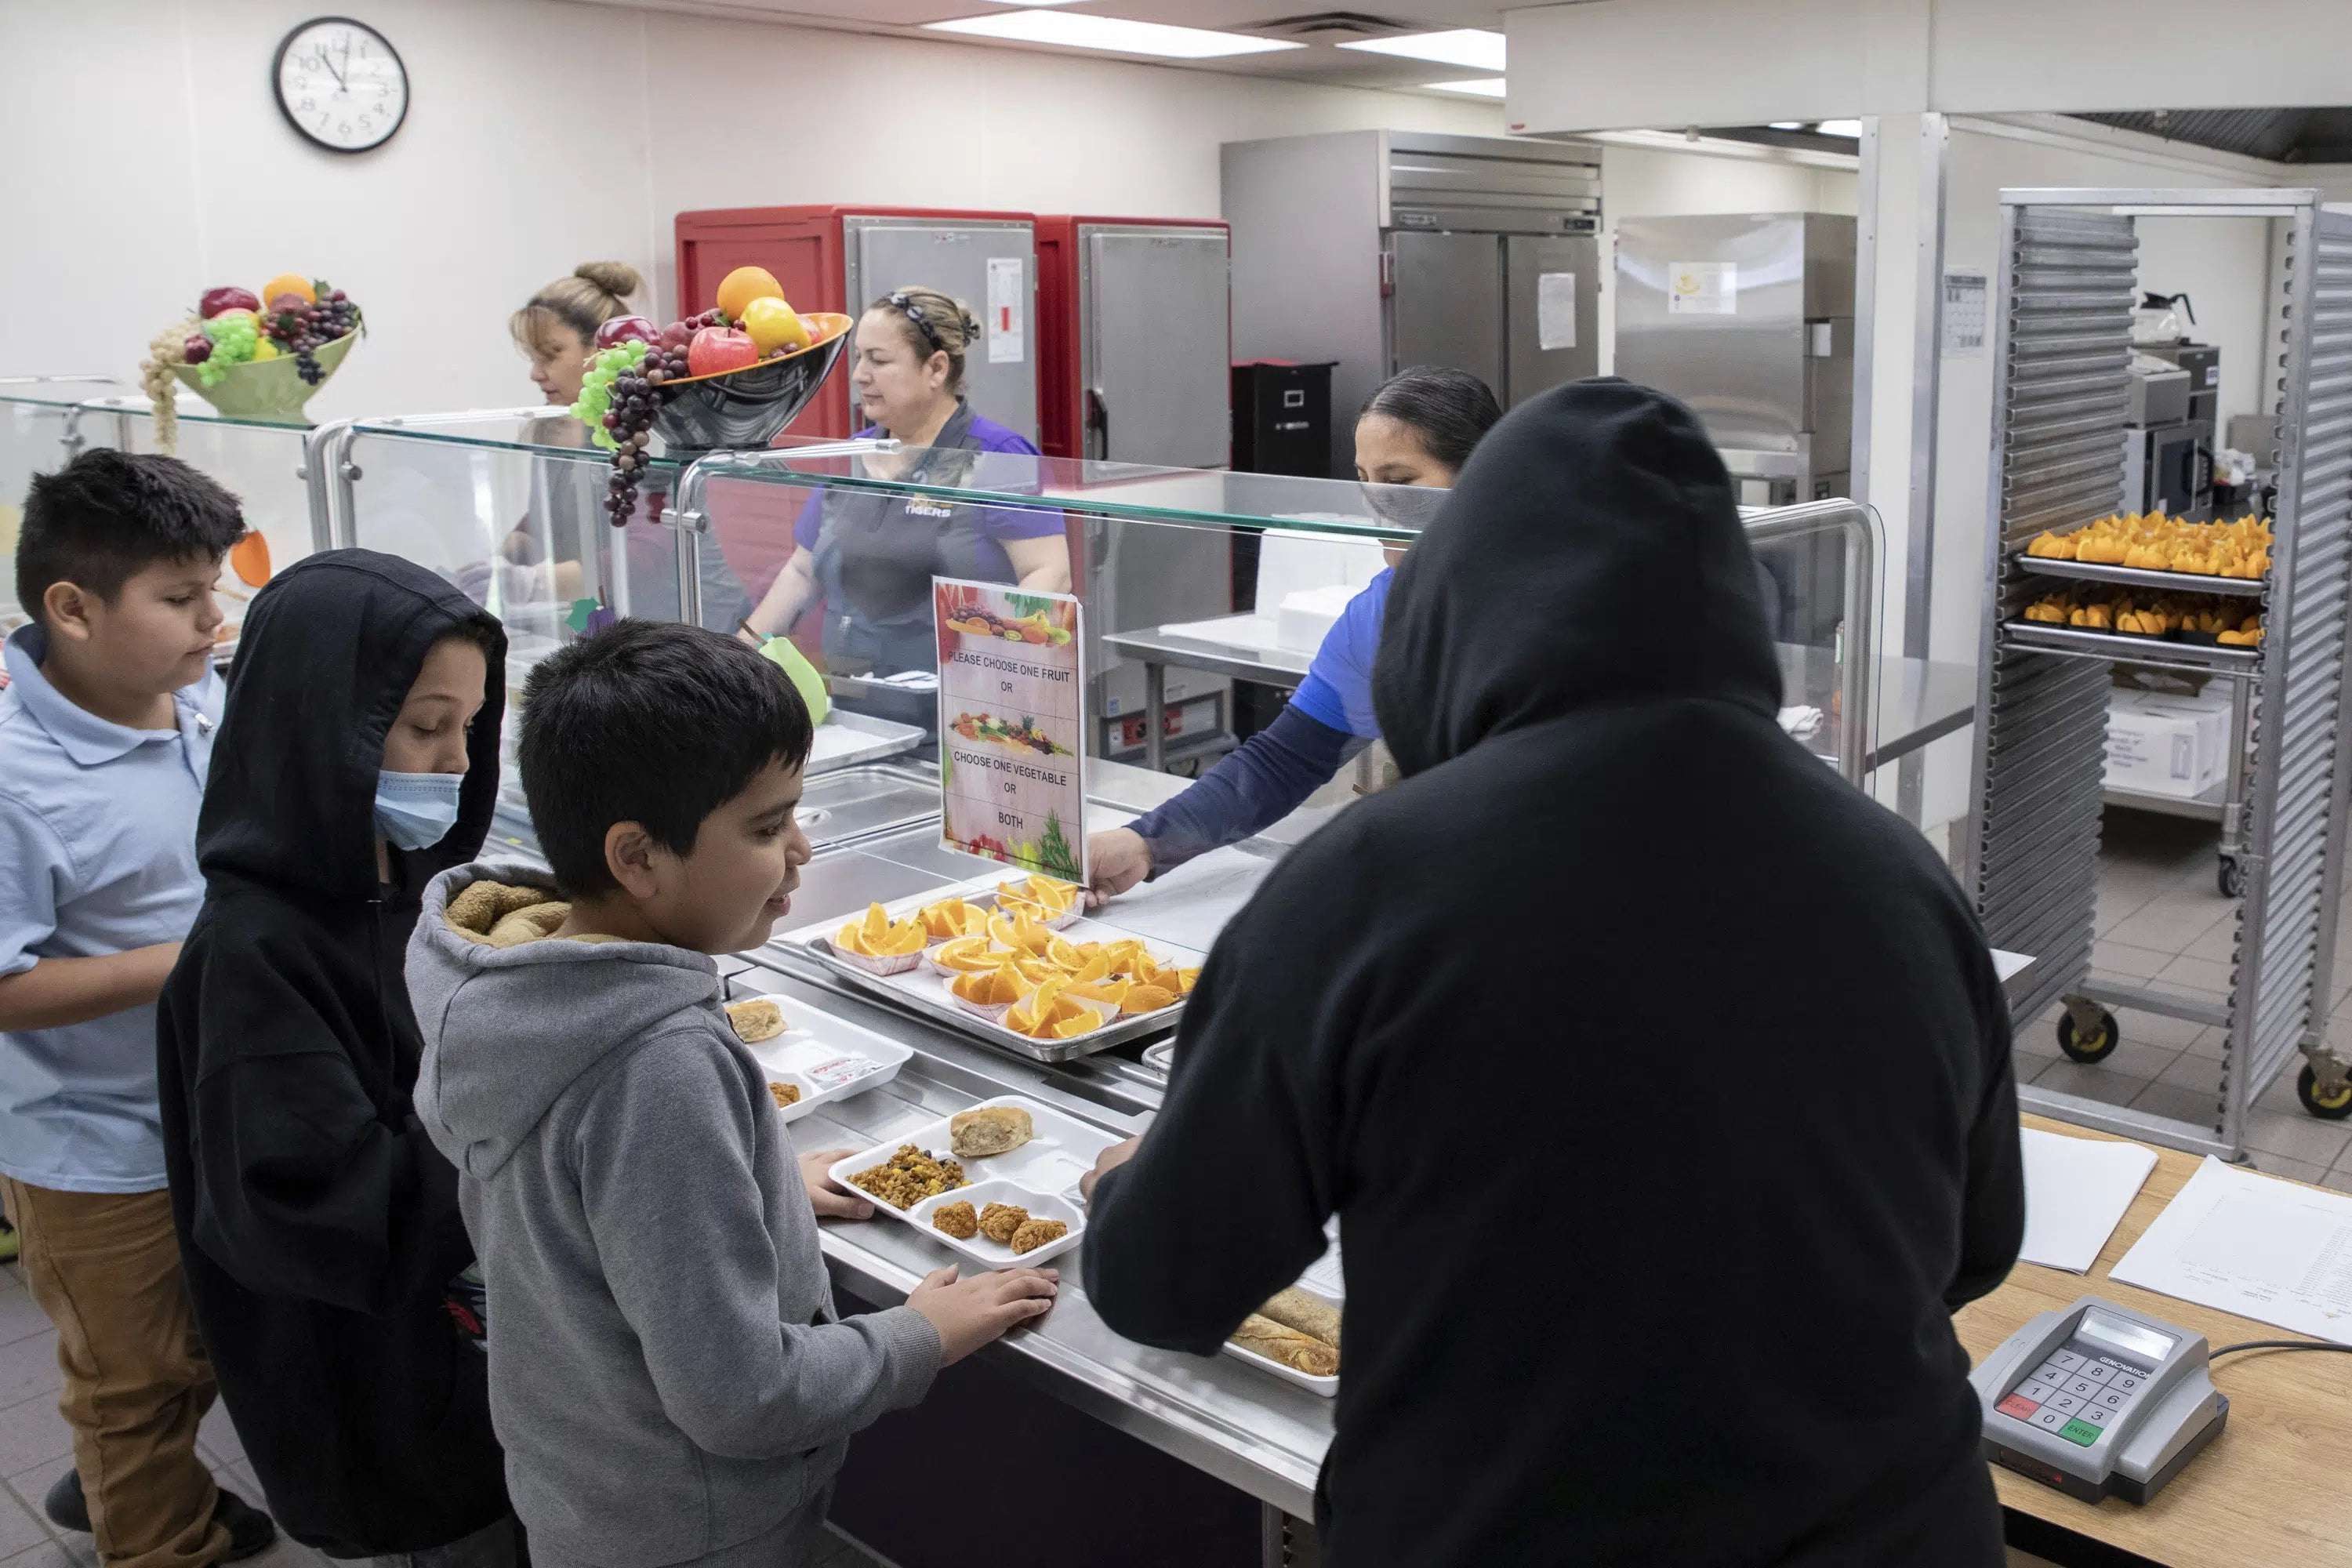 image for ‘It’s hard to focus’: Schools say American kids are hungry